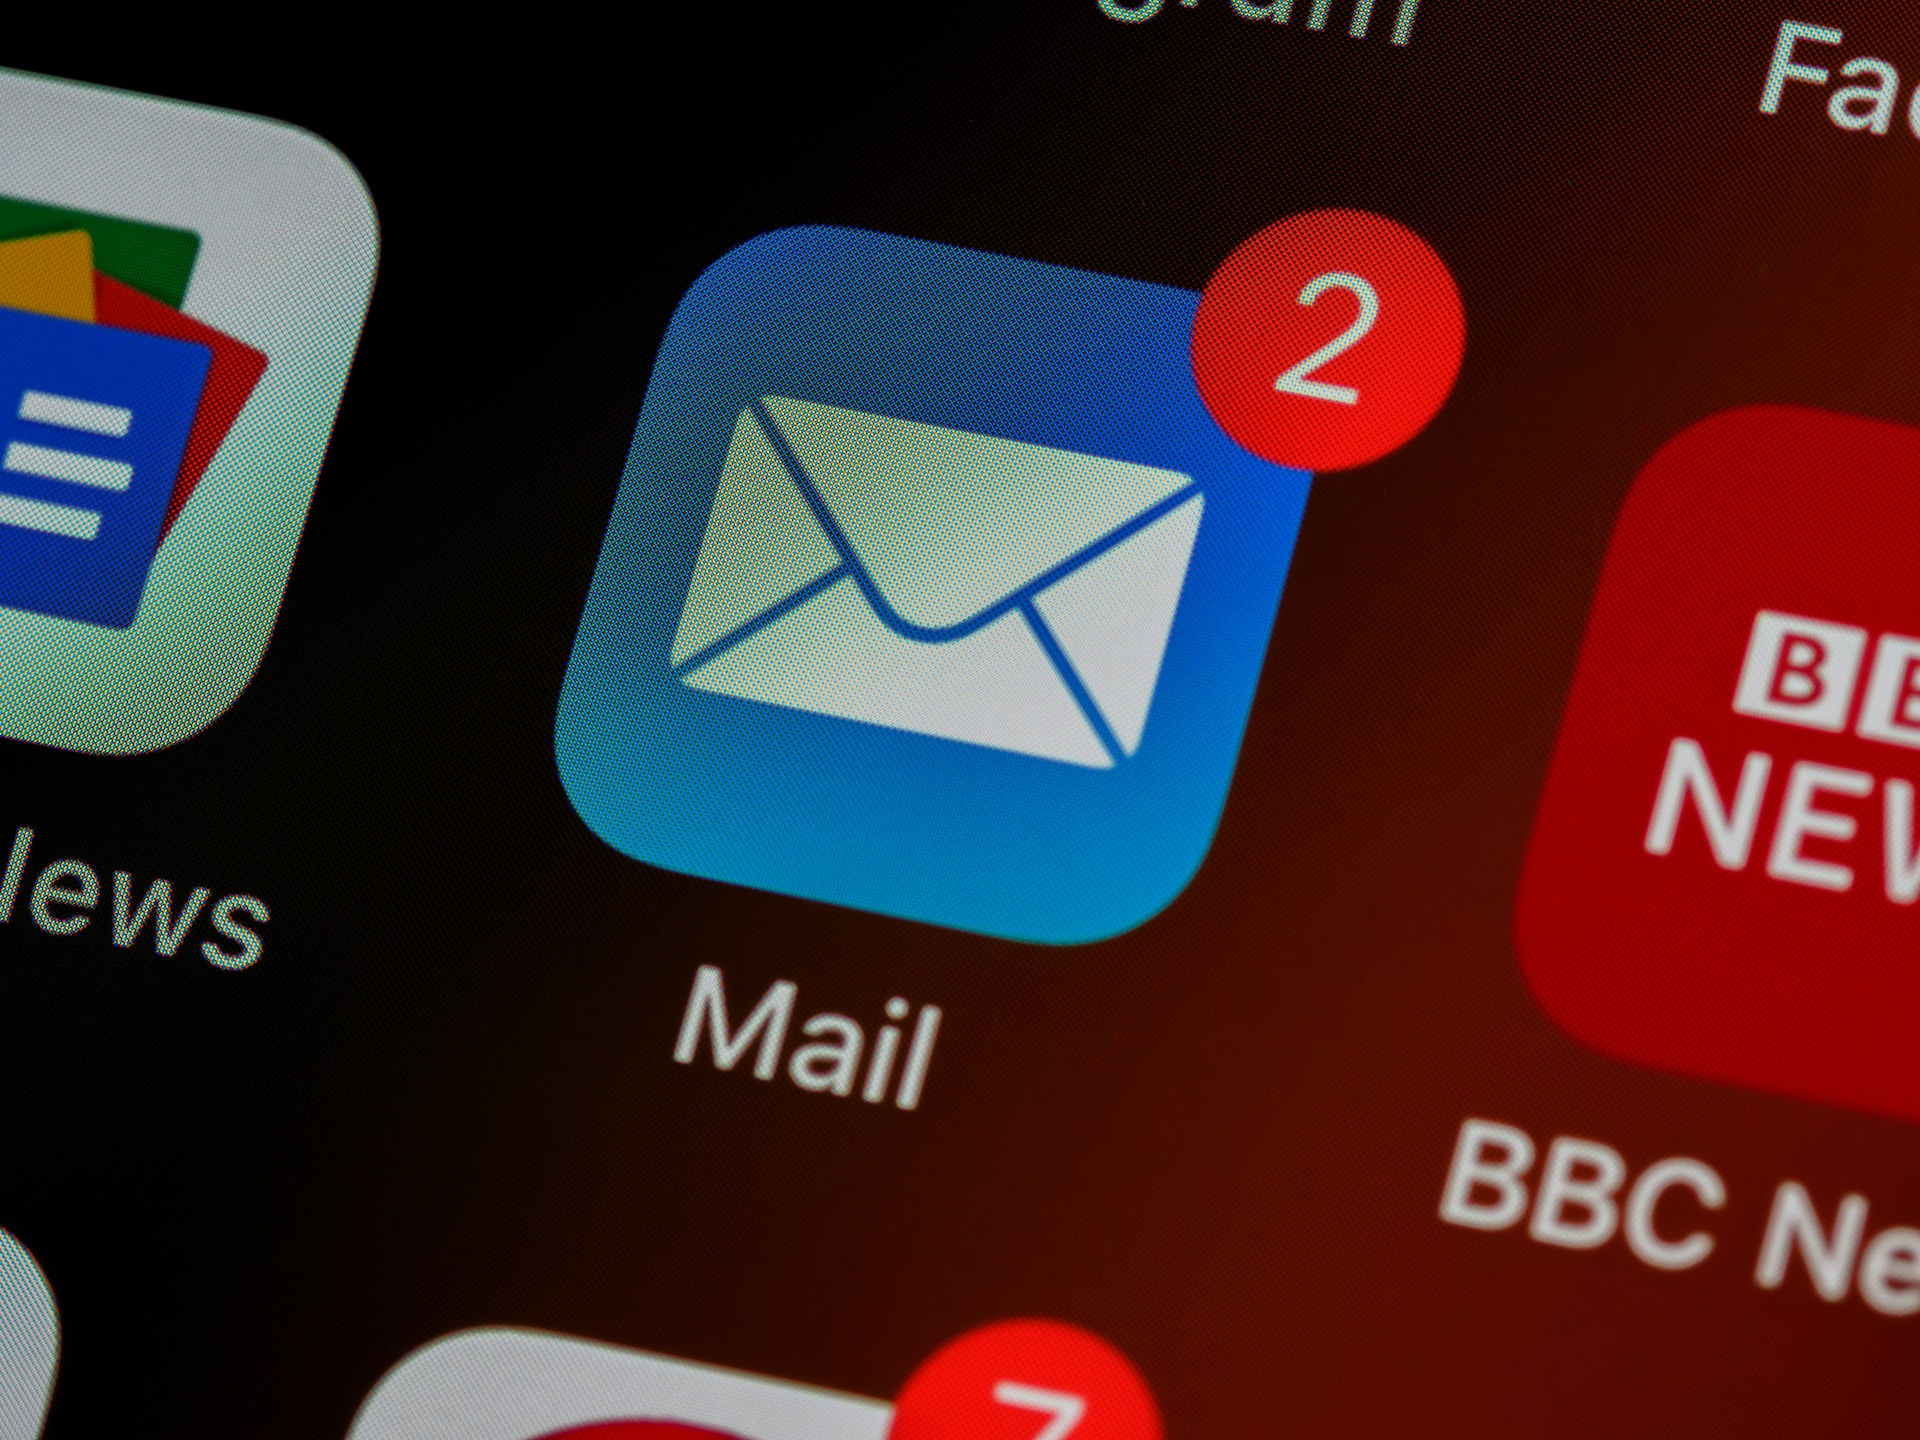 A light blue mail app icon, with the number ‘2’ inside a red circle on the icon’s upper left edge